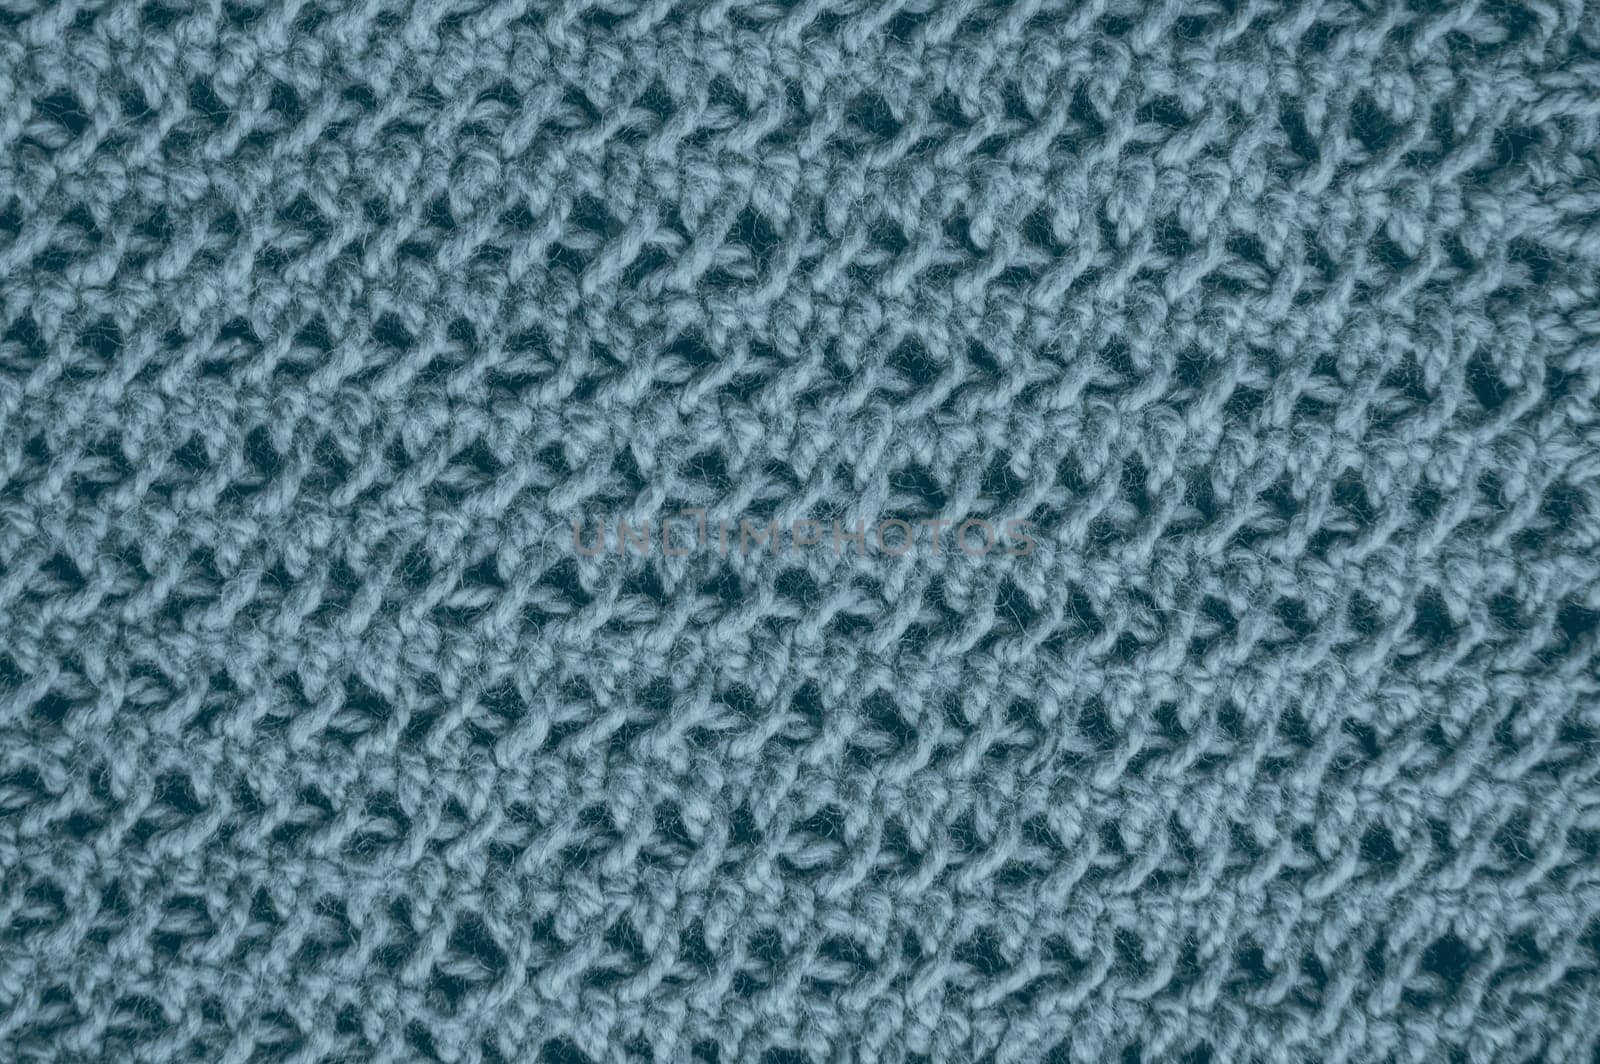 Fiber Knitted Sweater. Vintage Woven Fabric. Handmade Winter Background. Knitted Sweater. Blue Linen Thread. Nordic Warm Print. Detail Scarf Garment. Soft Knitted Blanket.